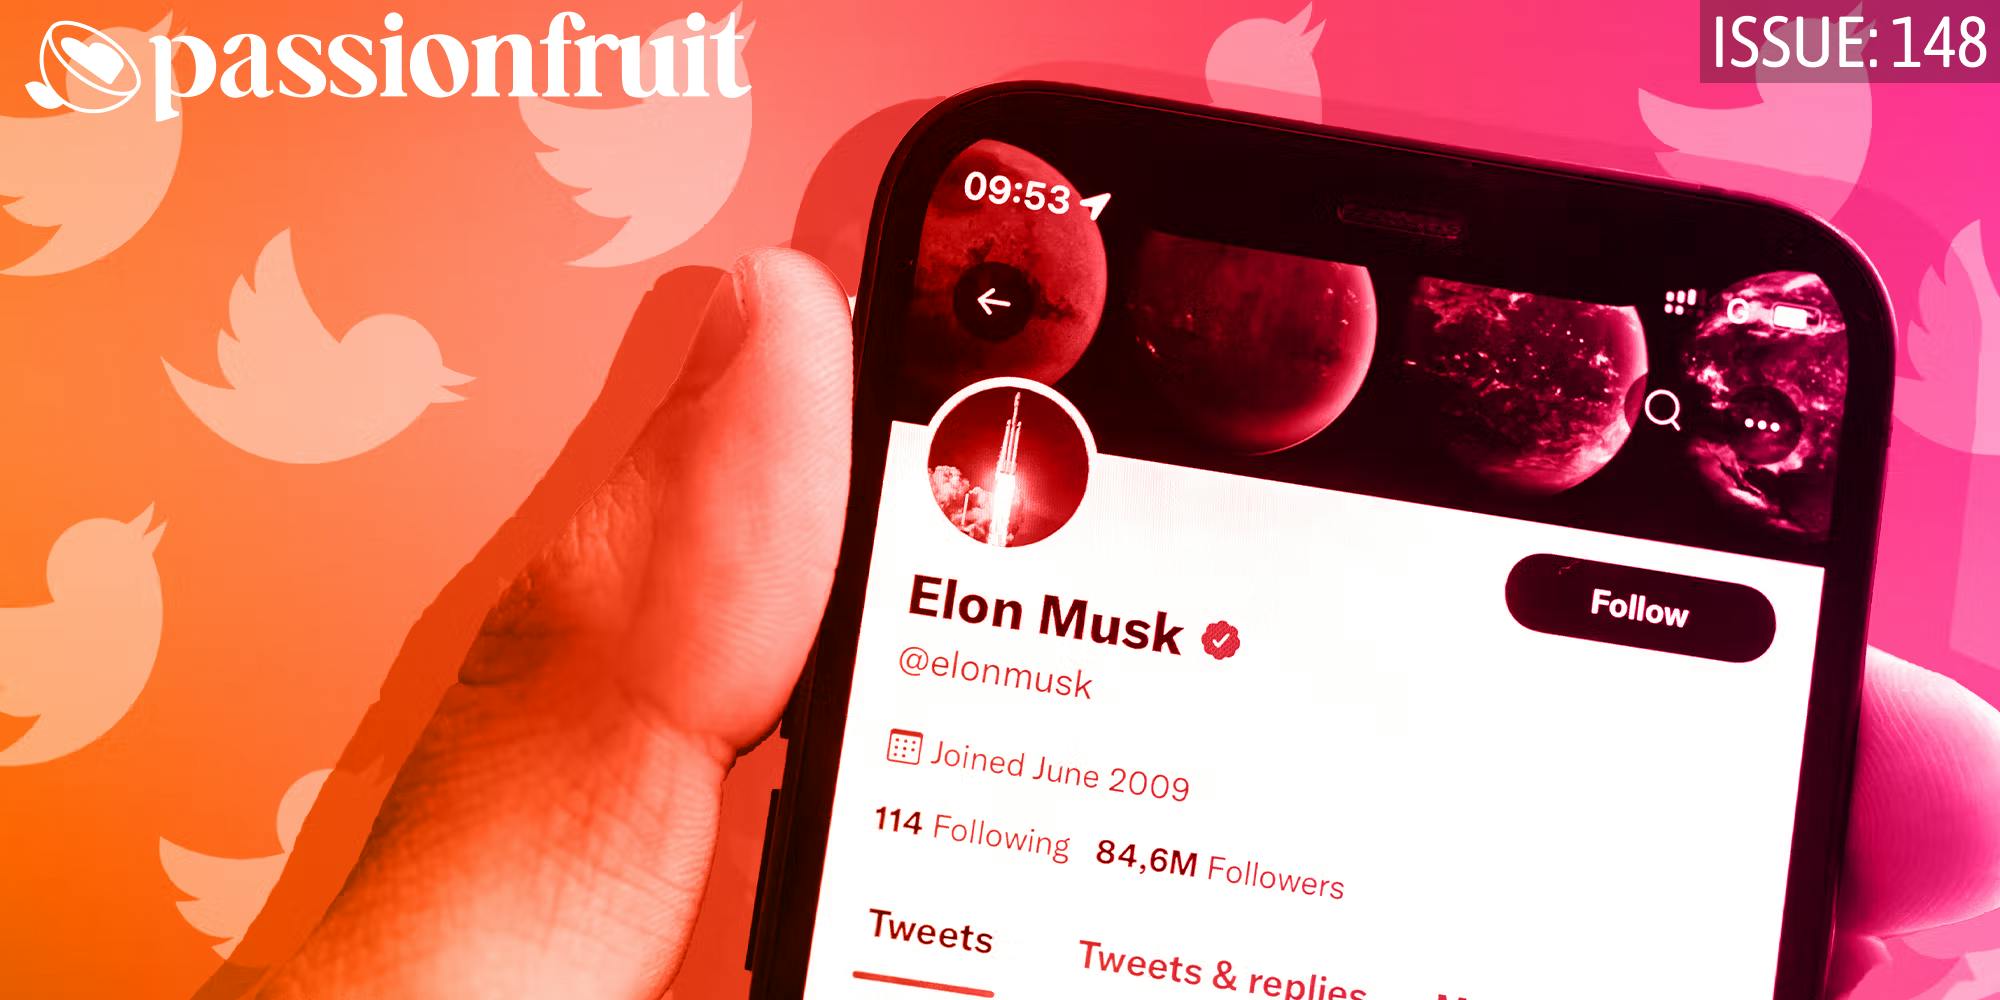 Why would Elon Musk limit views on his own platform?